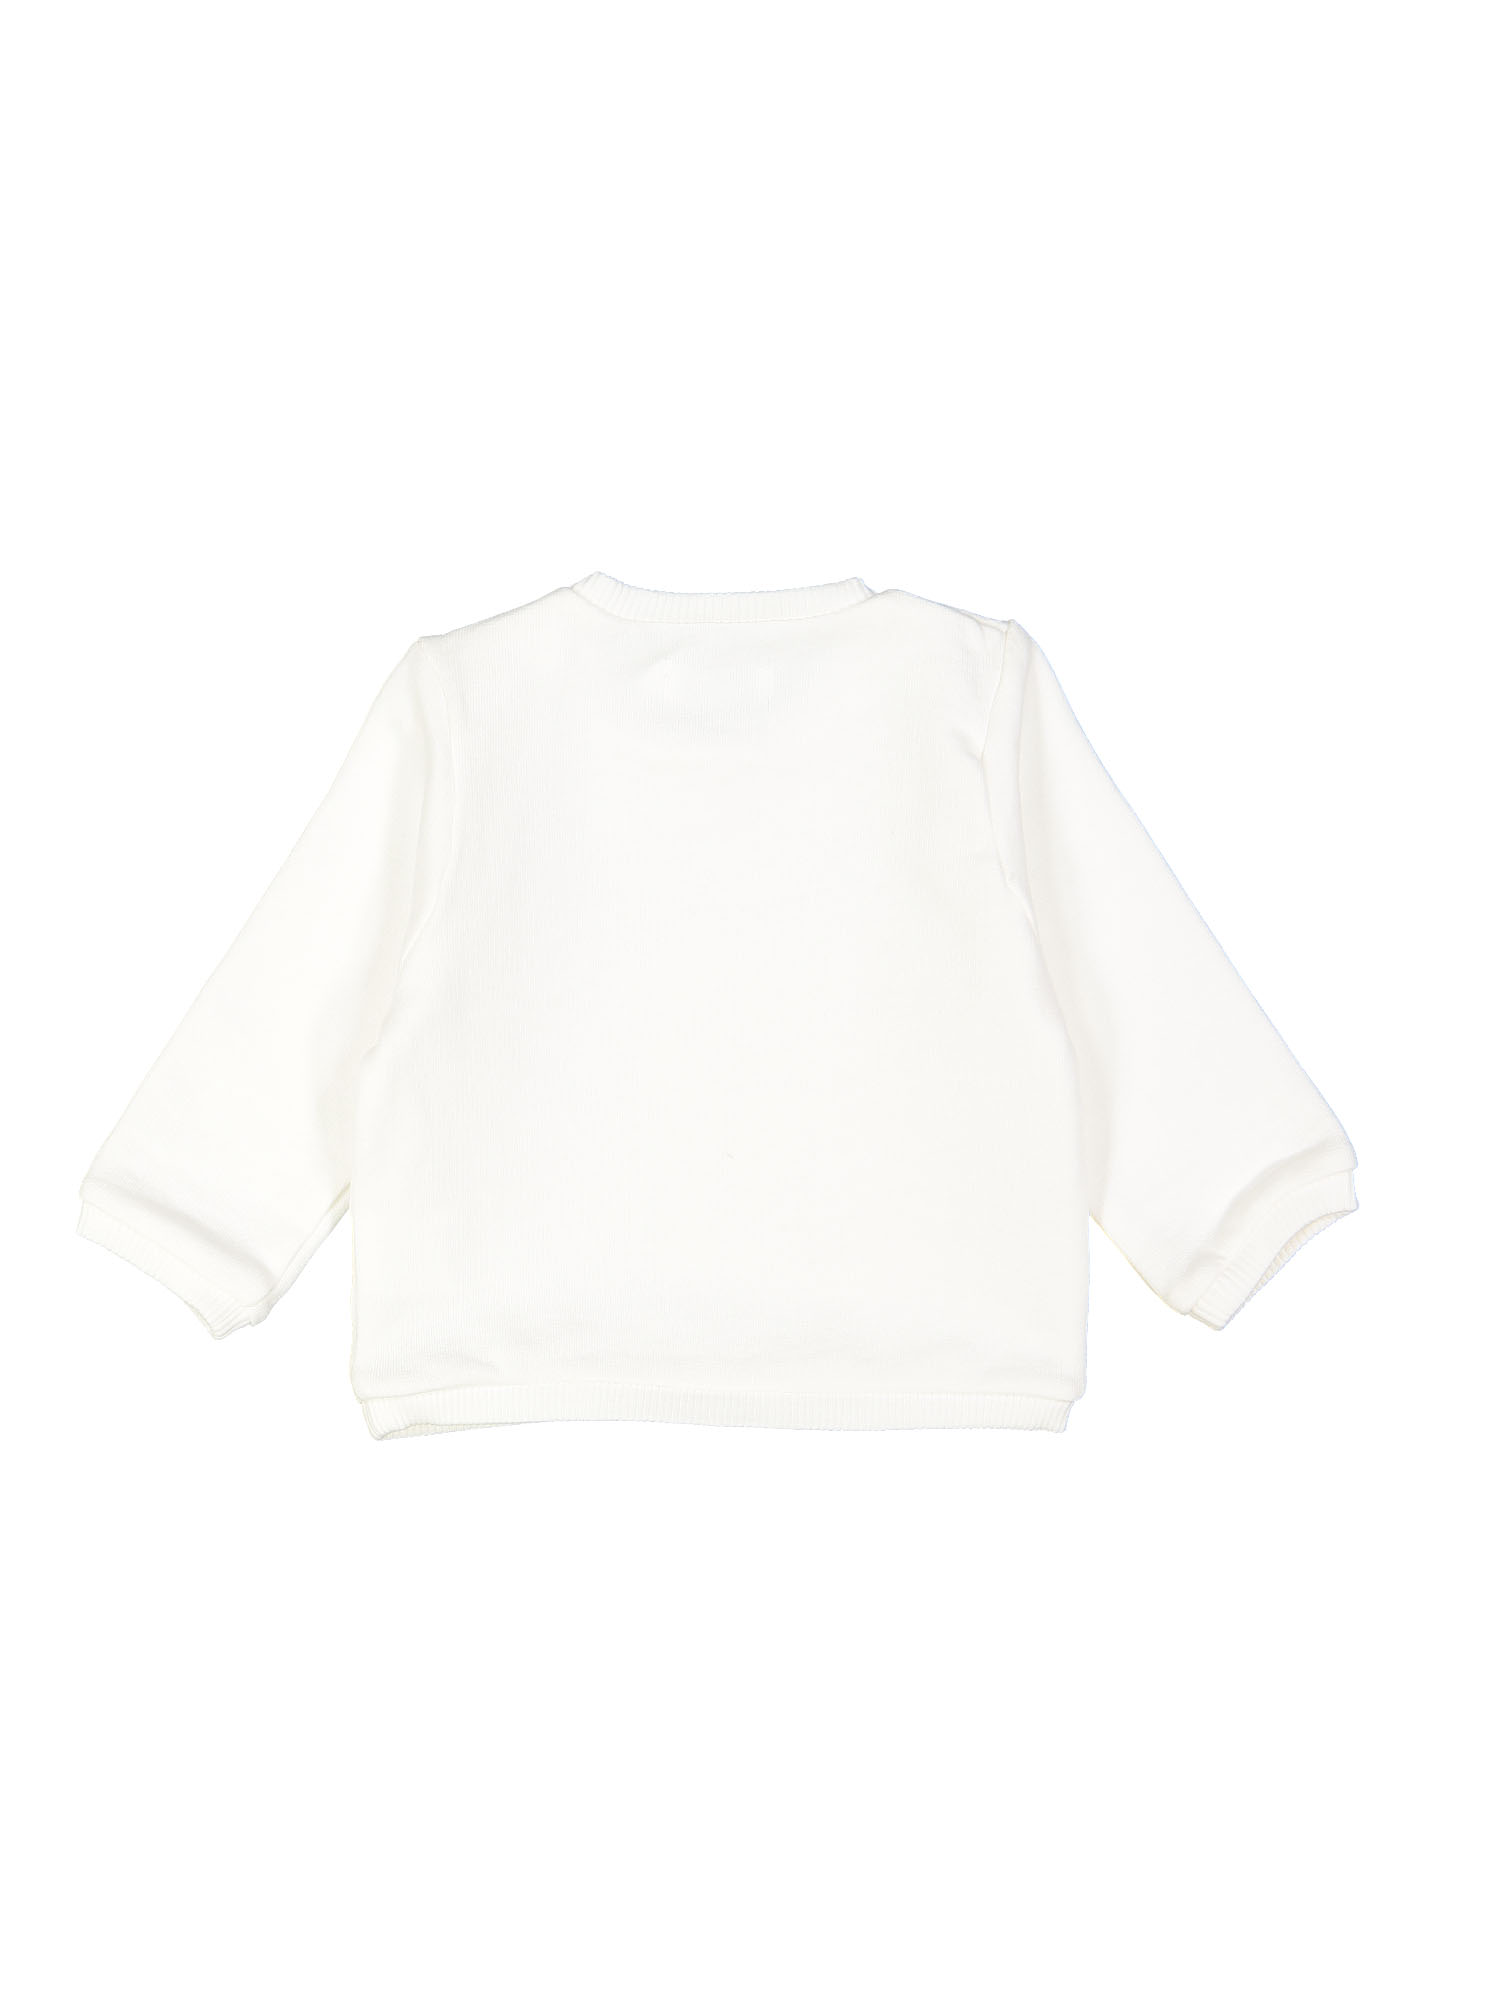 sweater mini do nothing day off white 18m